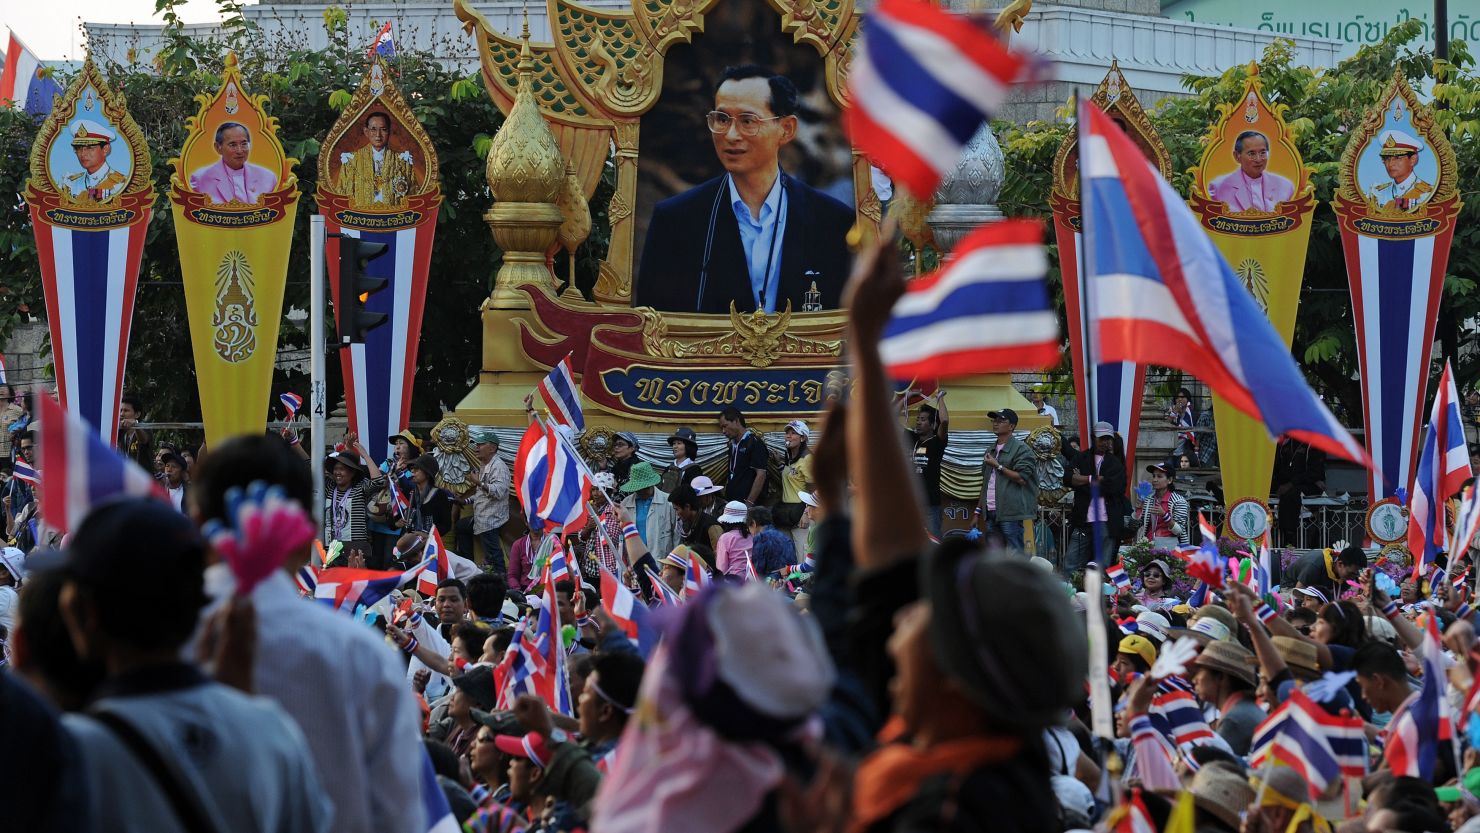 Thai anti-government protesters wave national flags as they rally in Bangkok on December 22.